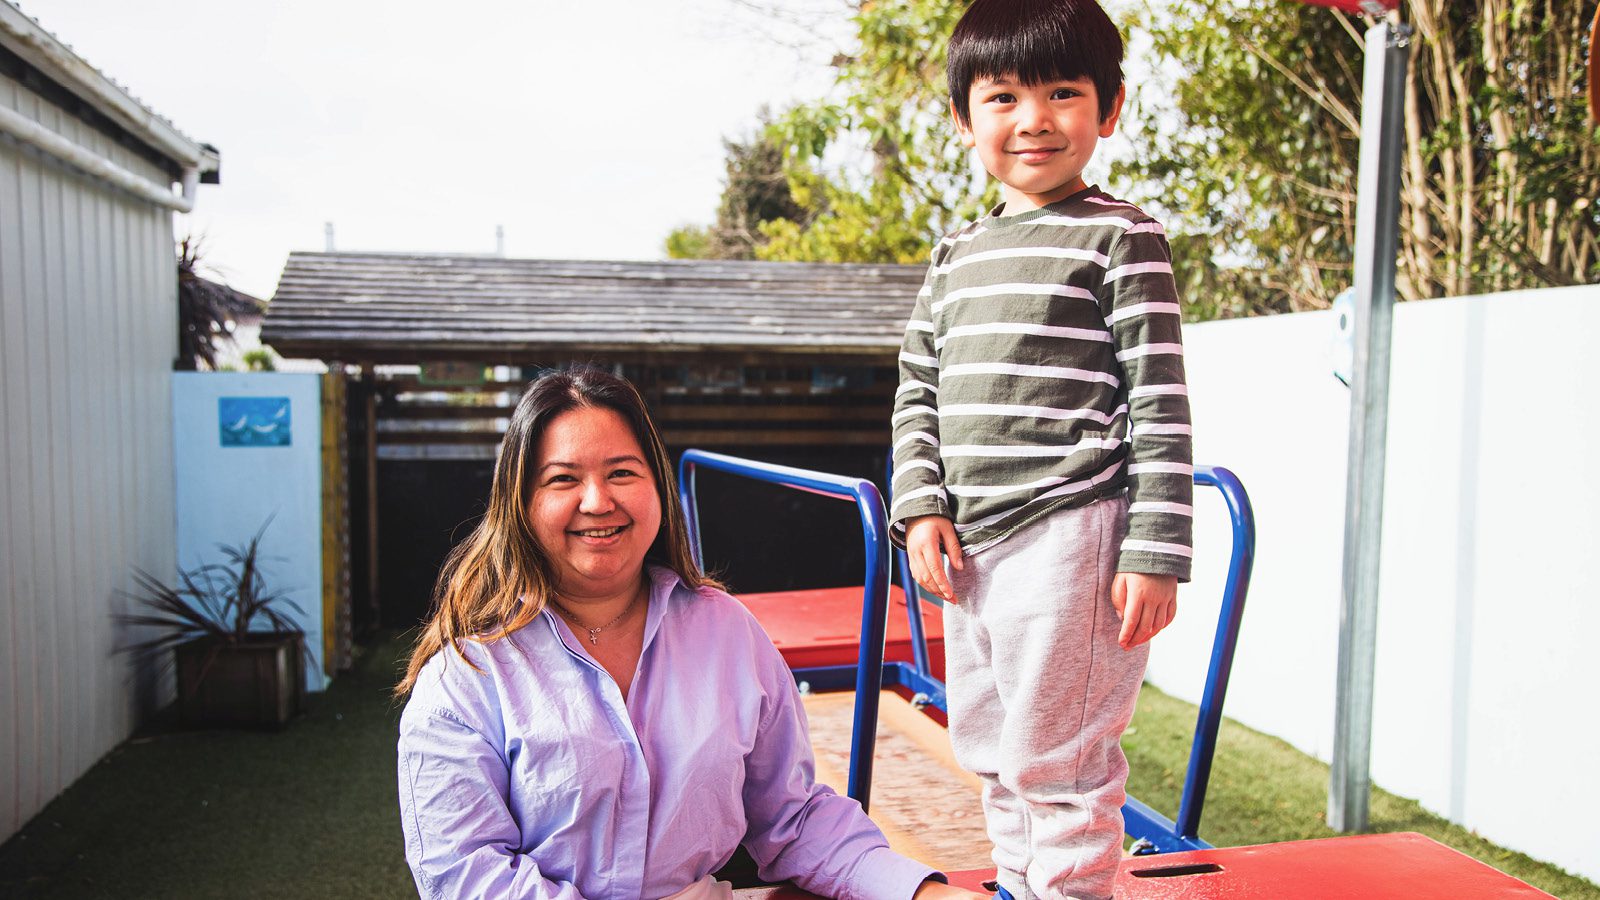 Carmen and her son at Eden Cottage, Visionwest's Early childhood learning and care centre.